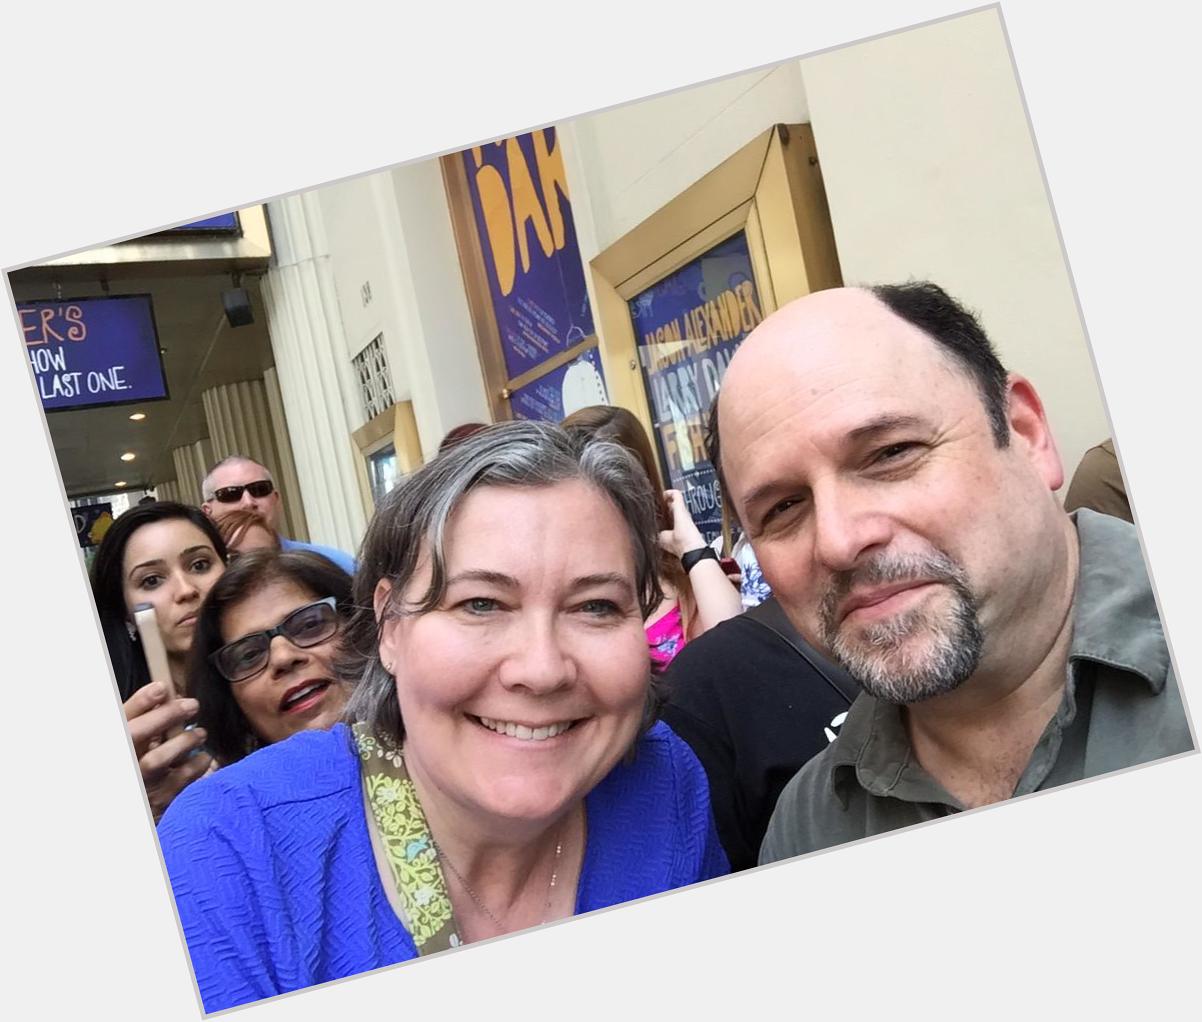 Happy birthday to Jason Alexander! So happy I got a pic with him after Fish in the Dark! 